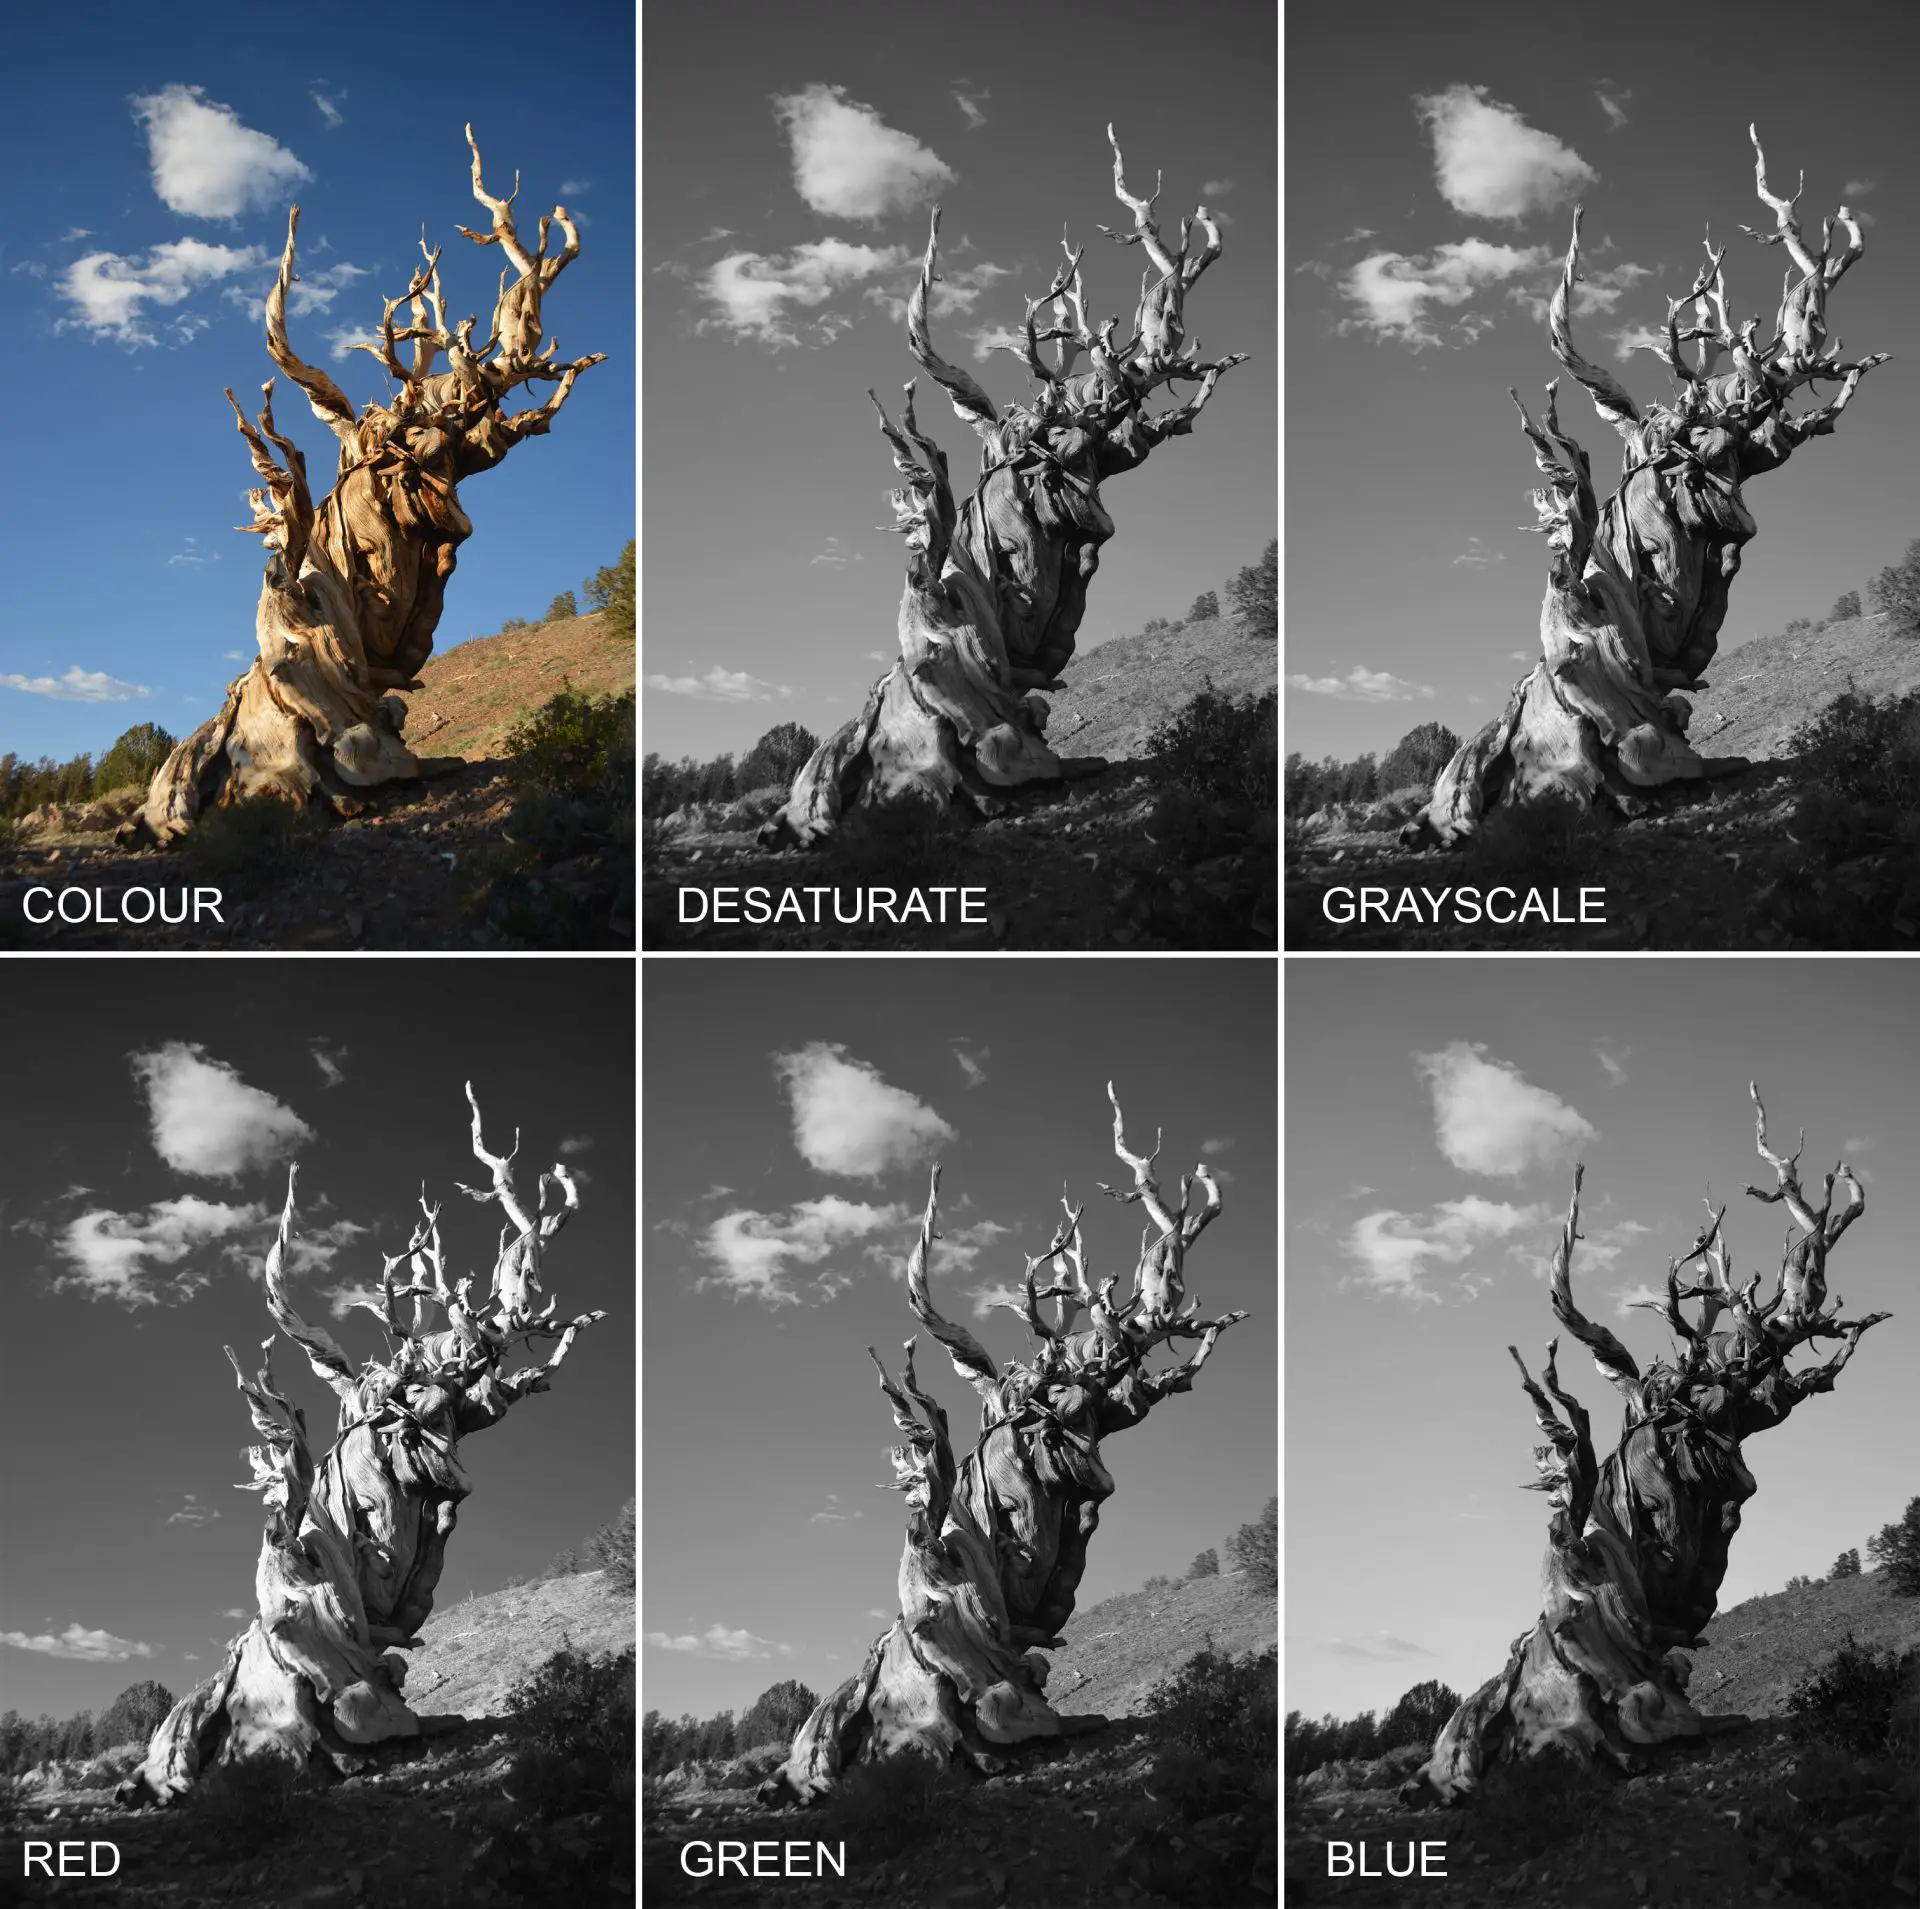 Colour Theory for Black and White Photography Part 1: Digital and